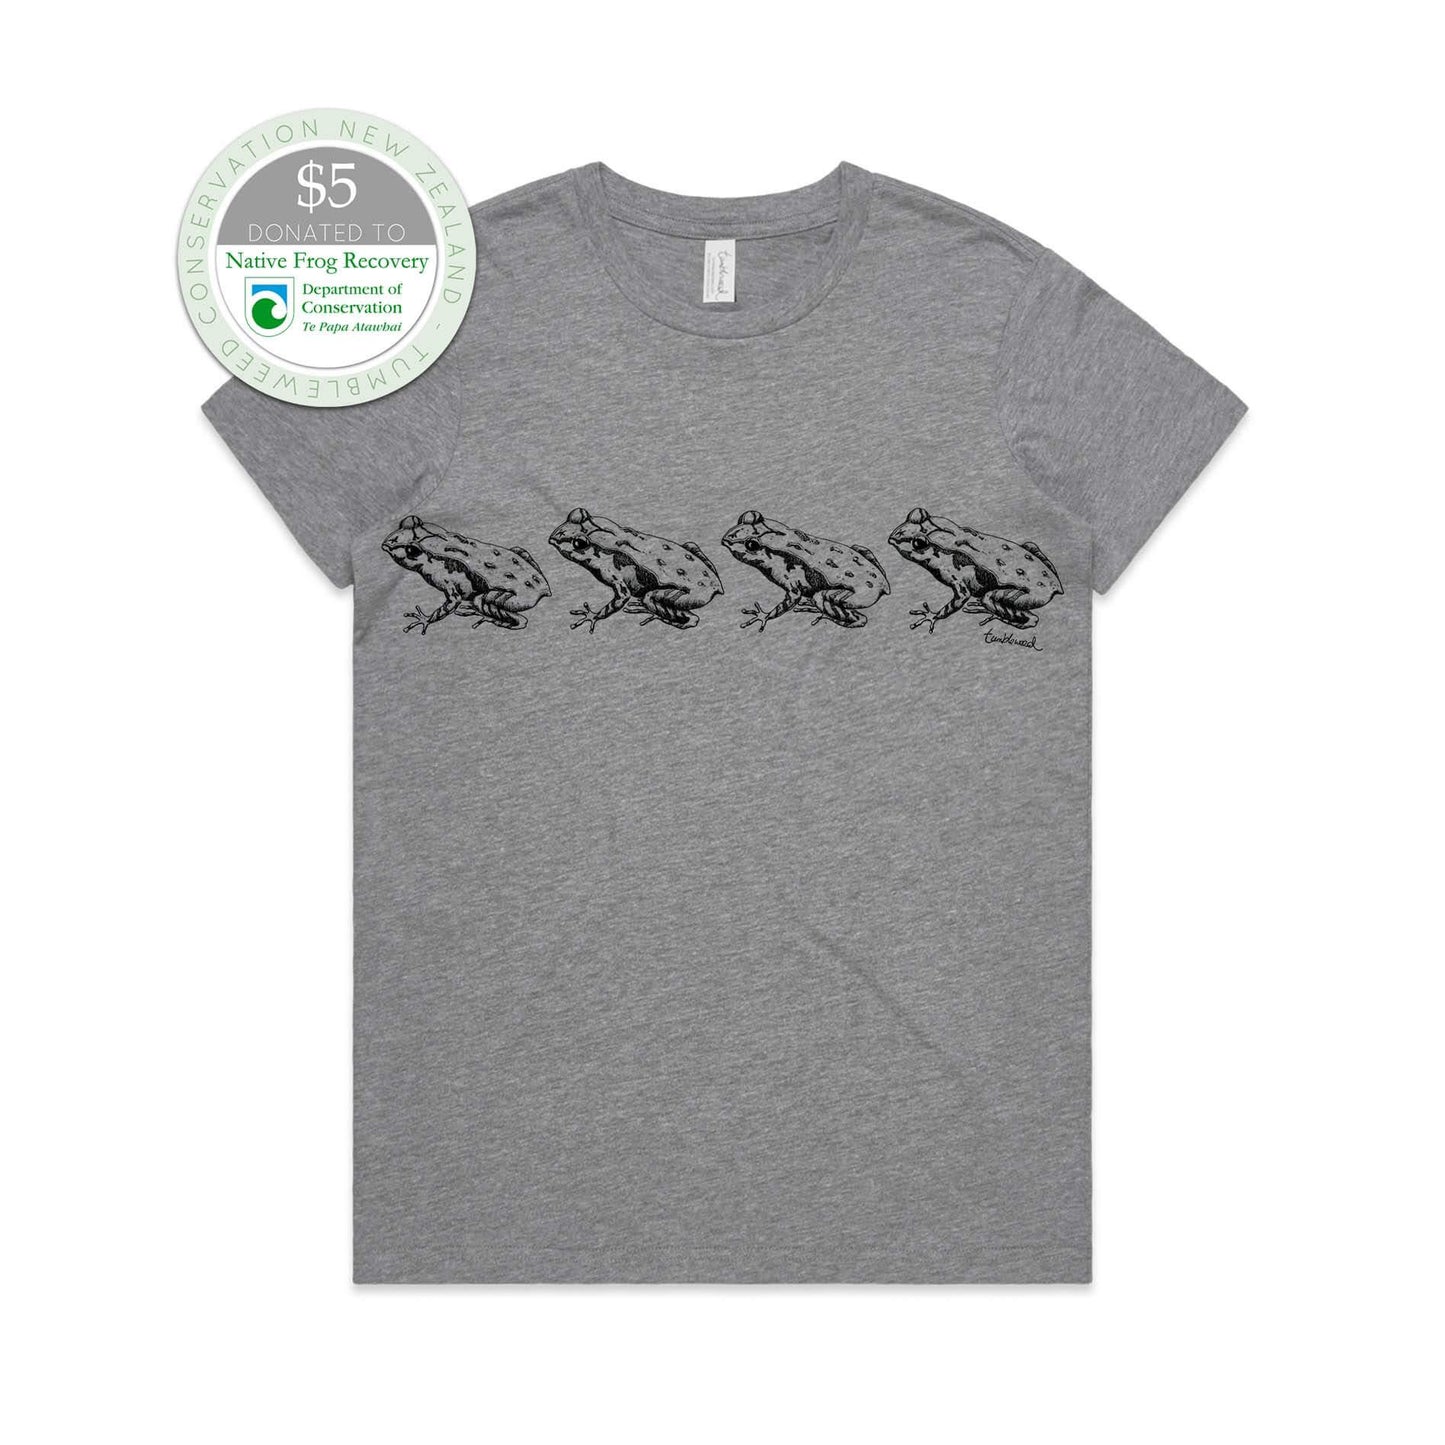 Grey marle, female t-shirt featuring a screen printed archey's frog design.